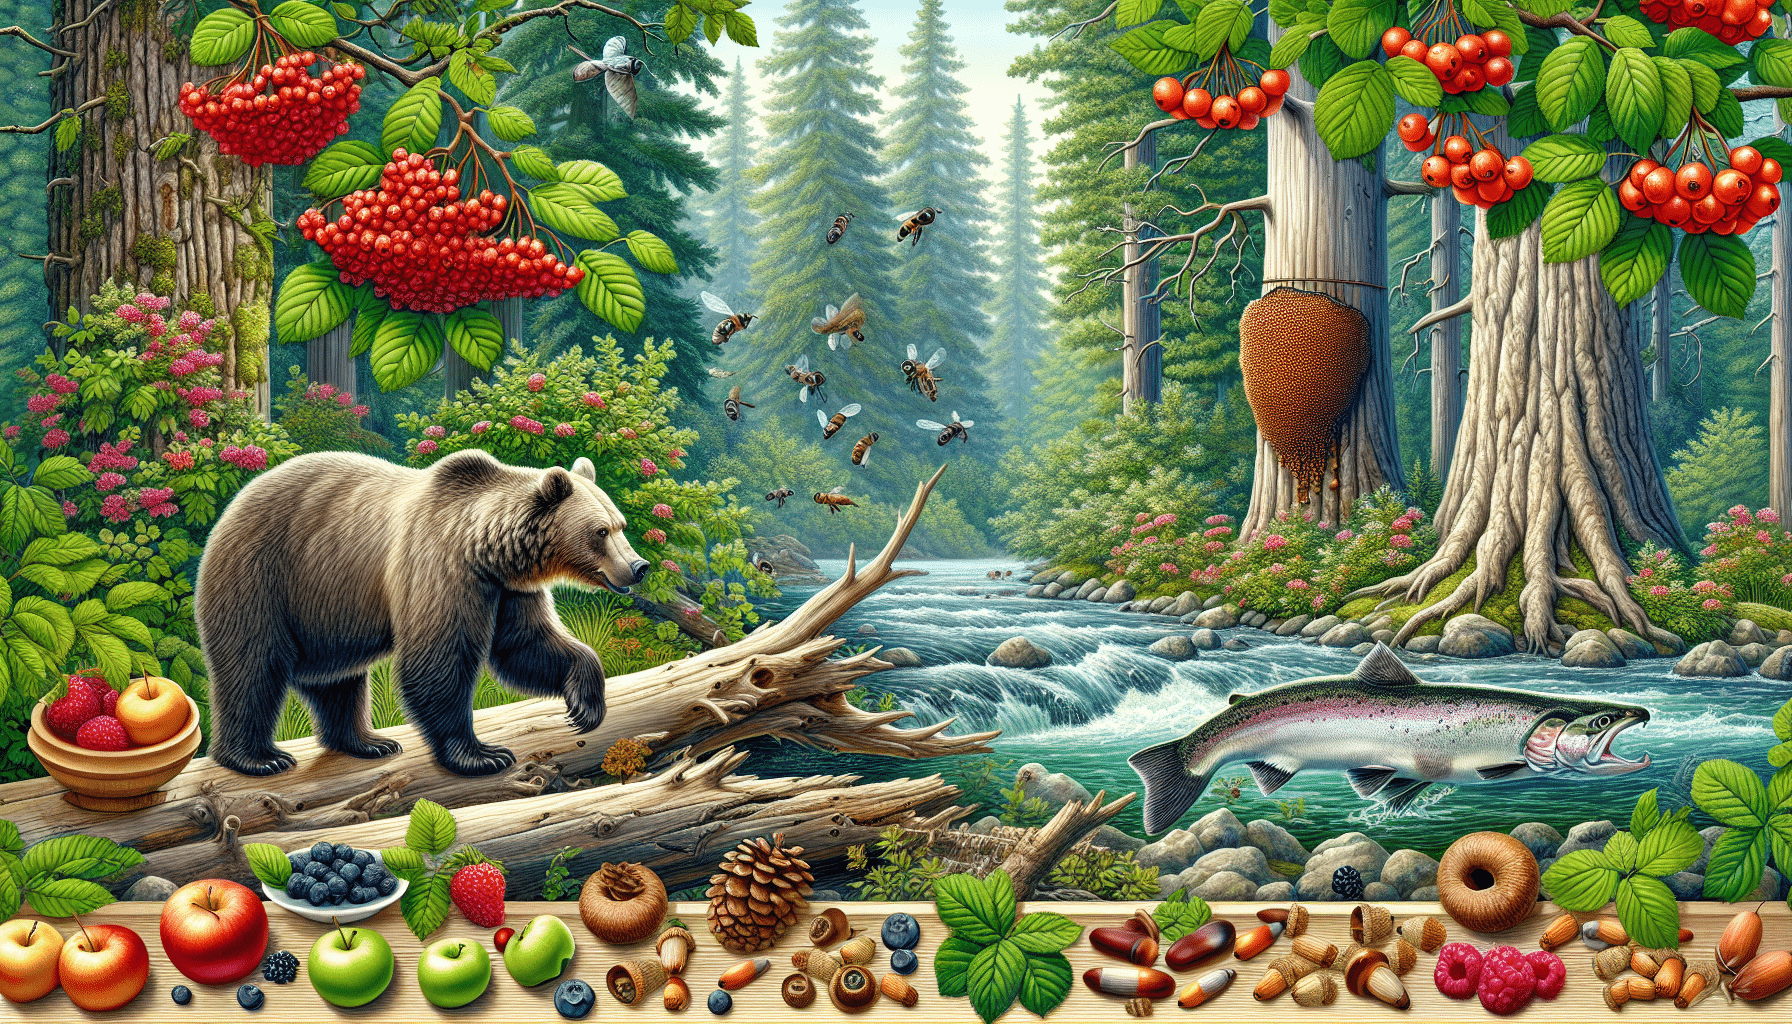 Visualize a detailed scene in nature. In the midst of a dense forest, a grizzly bear stands by a clear, flowing river, its paw swiping at a leaping salmon. Nearby, berry bushes loaded with ripe fruits add a splash of color to the scene. Scattered around the outskirts are fallen acorns and hickory nuts, remnants of past feasts. A beehive hangs from a towering tree at a safe distance, buzzing with activity. Keep the picture free of any human presence, brand logos, or text.